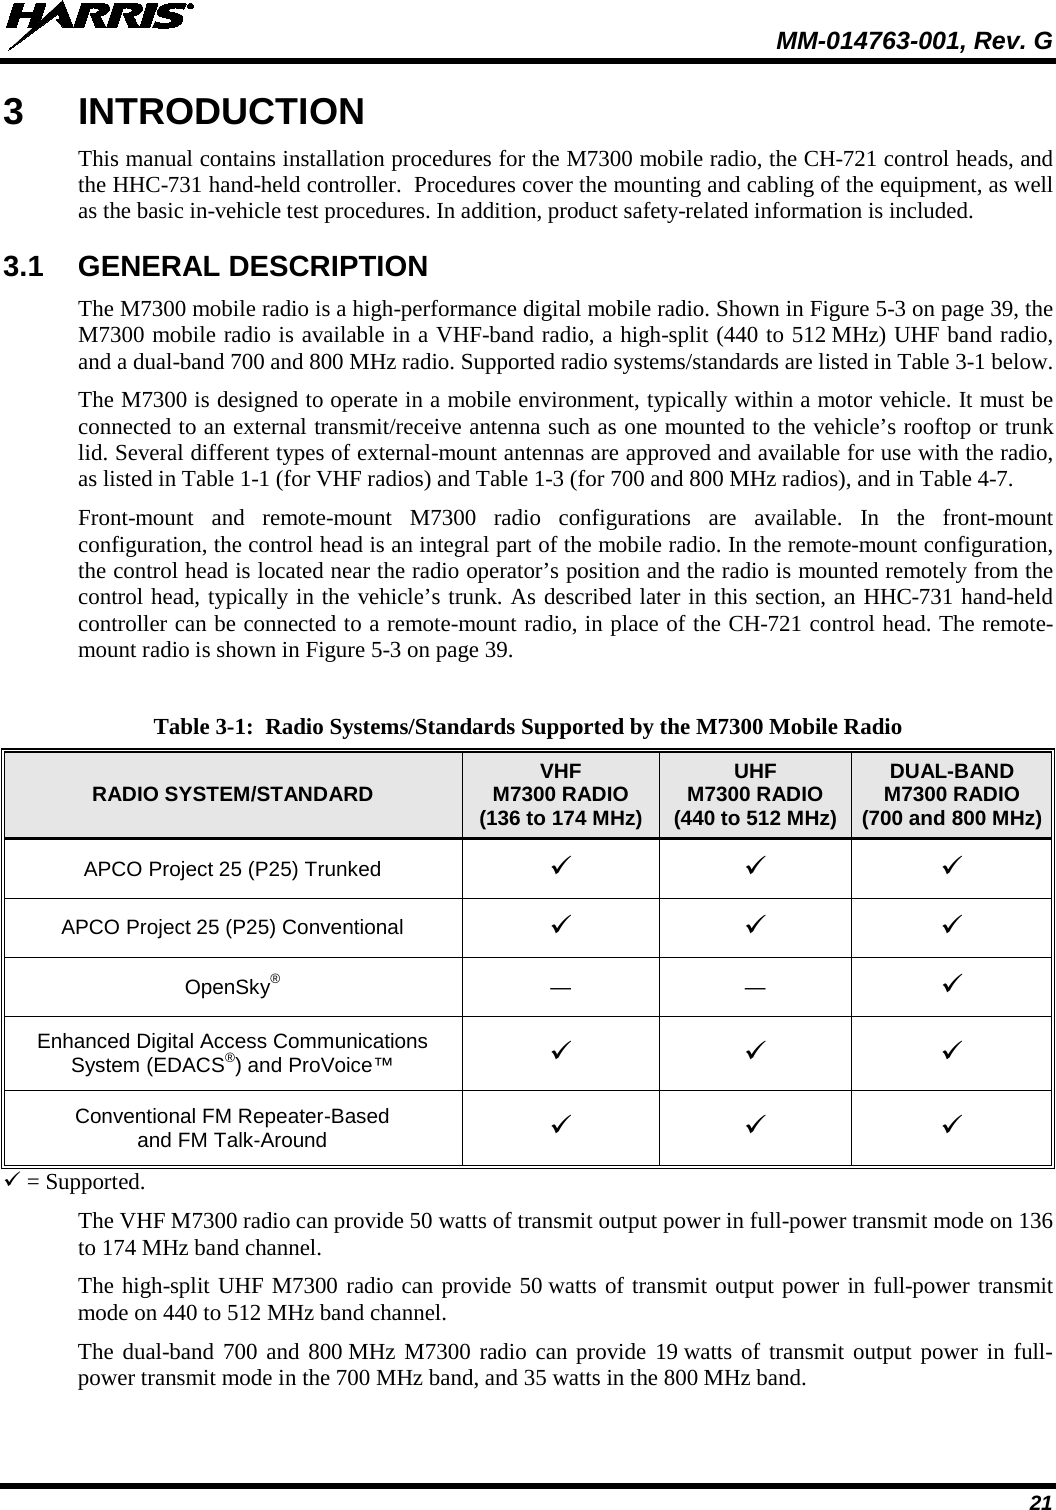  MM-014763-001, Rev. G 21 3  INTRODUCTION This manual contains installation procedures for the M7300 mobile radio, the CH-721 control heads, and the HHC-731 hand-held controller.  Procedures cover the mounting and cabling of the equipment, as well as the basic in-vehicle test procedures. In addition, product safety-related information is included. 3.1 GENERAL DESCRIPTION The M7300 mobile radio is a high-performance digital mobile radio. Shown in Figure 5-3 on page 39, the M7300 mobile radio is available in a VHF-band radio, a high-split (440 to 512 MHz) UHF band radio, and a dual-band 700 and 800 MHz radio. Supported radio systems/standards are listed in Table 3-1 below. The M7300 is designed to operate in a mobile environment, typically within a motor vehicle. It must be connected to an external transmit/receive antenna such as one mounted to the vehicle’s rooftop or trunk lid. Several different types of external-mount antennas are approved and available for use with the radio, as listed in Table 1-1 (for VHF radios) and Table 1-3 (for 700 and 800 MHz radios), and in Table 4-7. Front-mount and remote-mount  M7300 radio configurations are available. In the front-mount configuration, the control head is an integral part of the mobile radio. In the remote-mount configuration, the control head is located near the radio operator’s position and the radio is mounted remotely from the control head, typically in the vehicle’s trunk. As described later in this section, an HHC-731 hand-held controller can be connected to a remote-mount radio, in place of the CH-721 control head. The remote-mount radio is shown in Figure 5-3 on page 39. Table 3-1:  Radio Systems/Standards Supported by the M7300 Mobile Radio RADIO SYSTEM/STANDARD VHF M7300 RADIO (136 to 174 MHz) UHF M7300 RADIO (440 to 512 MHz) DUAL-BAND M7300 RADIO (700 and 800 MHz) APCO Project 25 (P25) Trunked    APCO Project 25 (P25) Conventional    OpenSky®  —  —   Enhanced Digital Access Communications System (EDACS®) and ProVoice™     Conventional FM Repeater-Based and FM Talk-Around     = Supported. The VHF M7300 radio can provide 50 watts of transmit output power in full-power transmit mode on 136 to 174 MHz band channel. The high-split UHF M7300 radio can provide 50 watts of transmit output power in full-power transmit mode on 440 to 512 MHz band channel. The dual-band 700 and 800 MHz M7300 radio can provide 19 watts of transmit output power in full-power transmit mode in the 700 MHz band, and 35 watts in the 800 MHz band. 